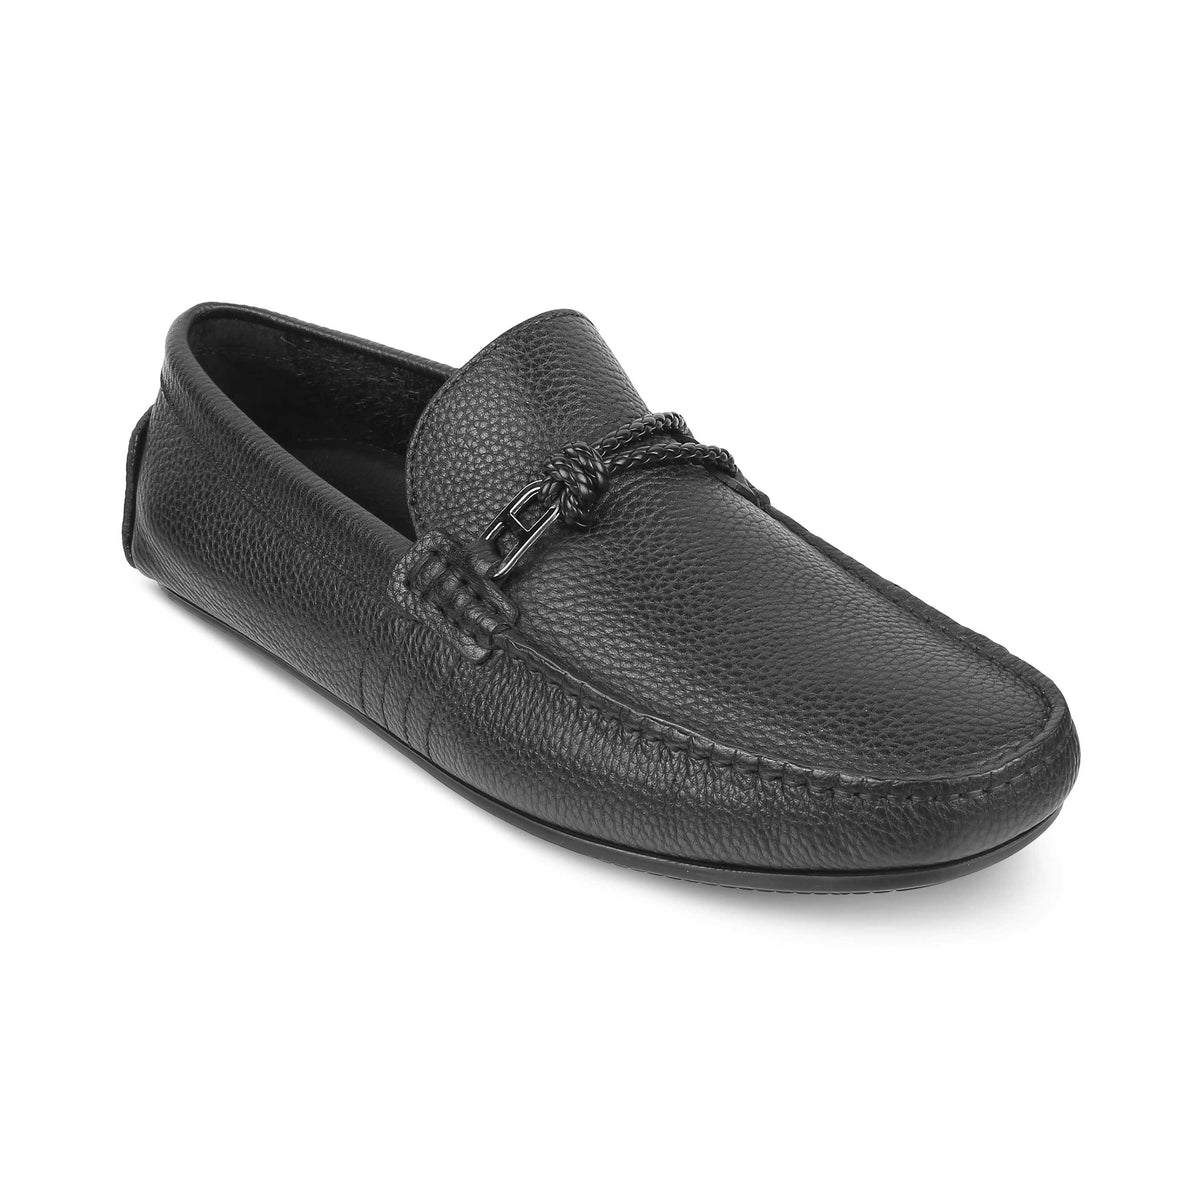 Tresmode Monoc Black Men's Leather Driving Loafers - Tresmode